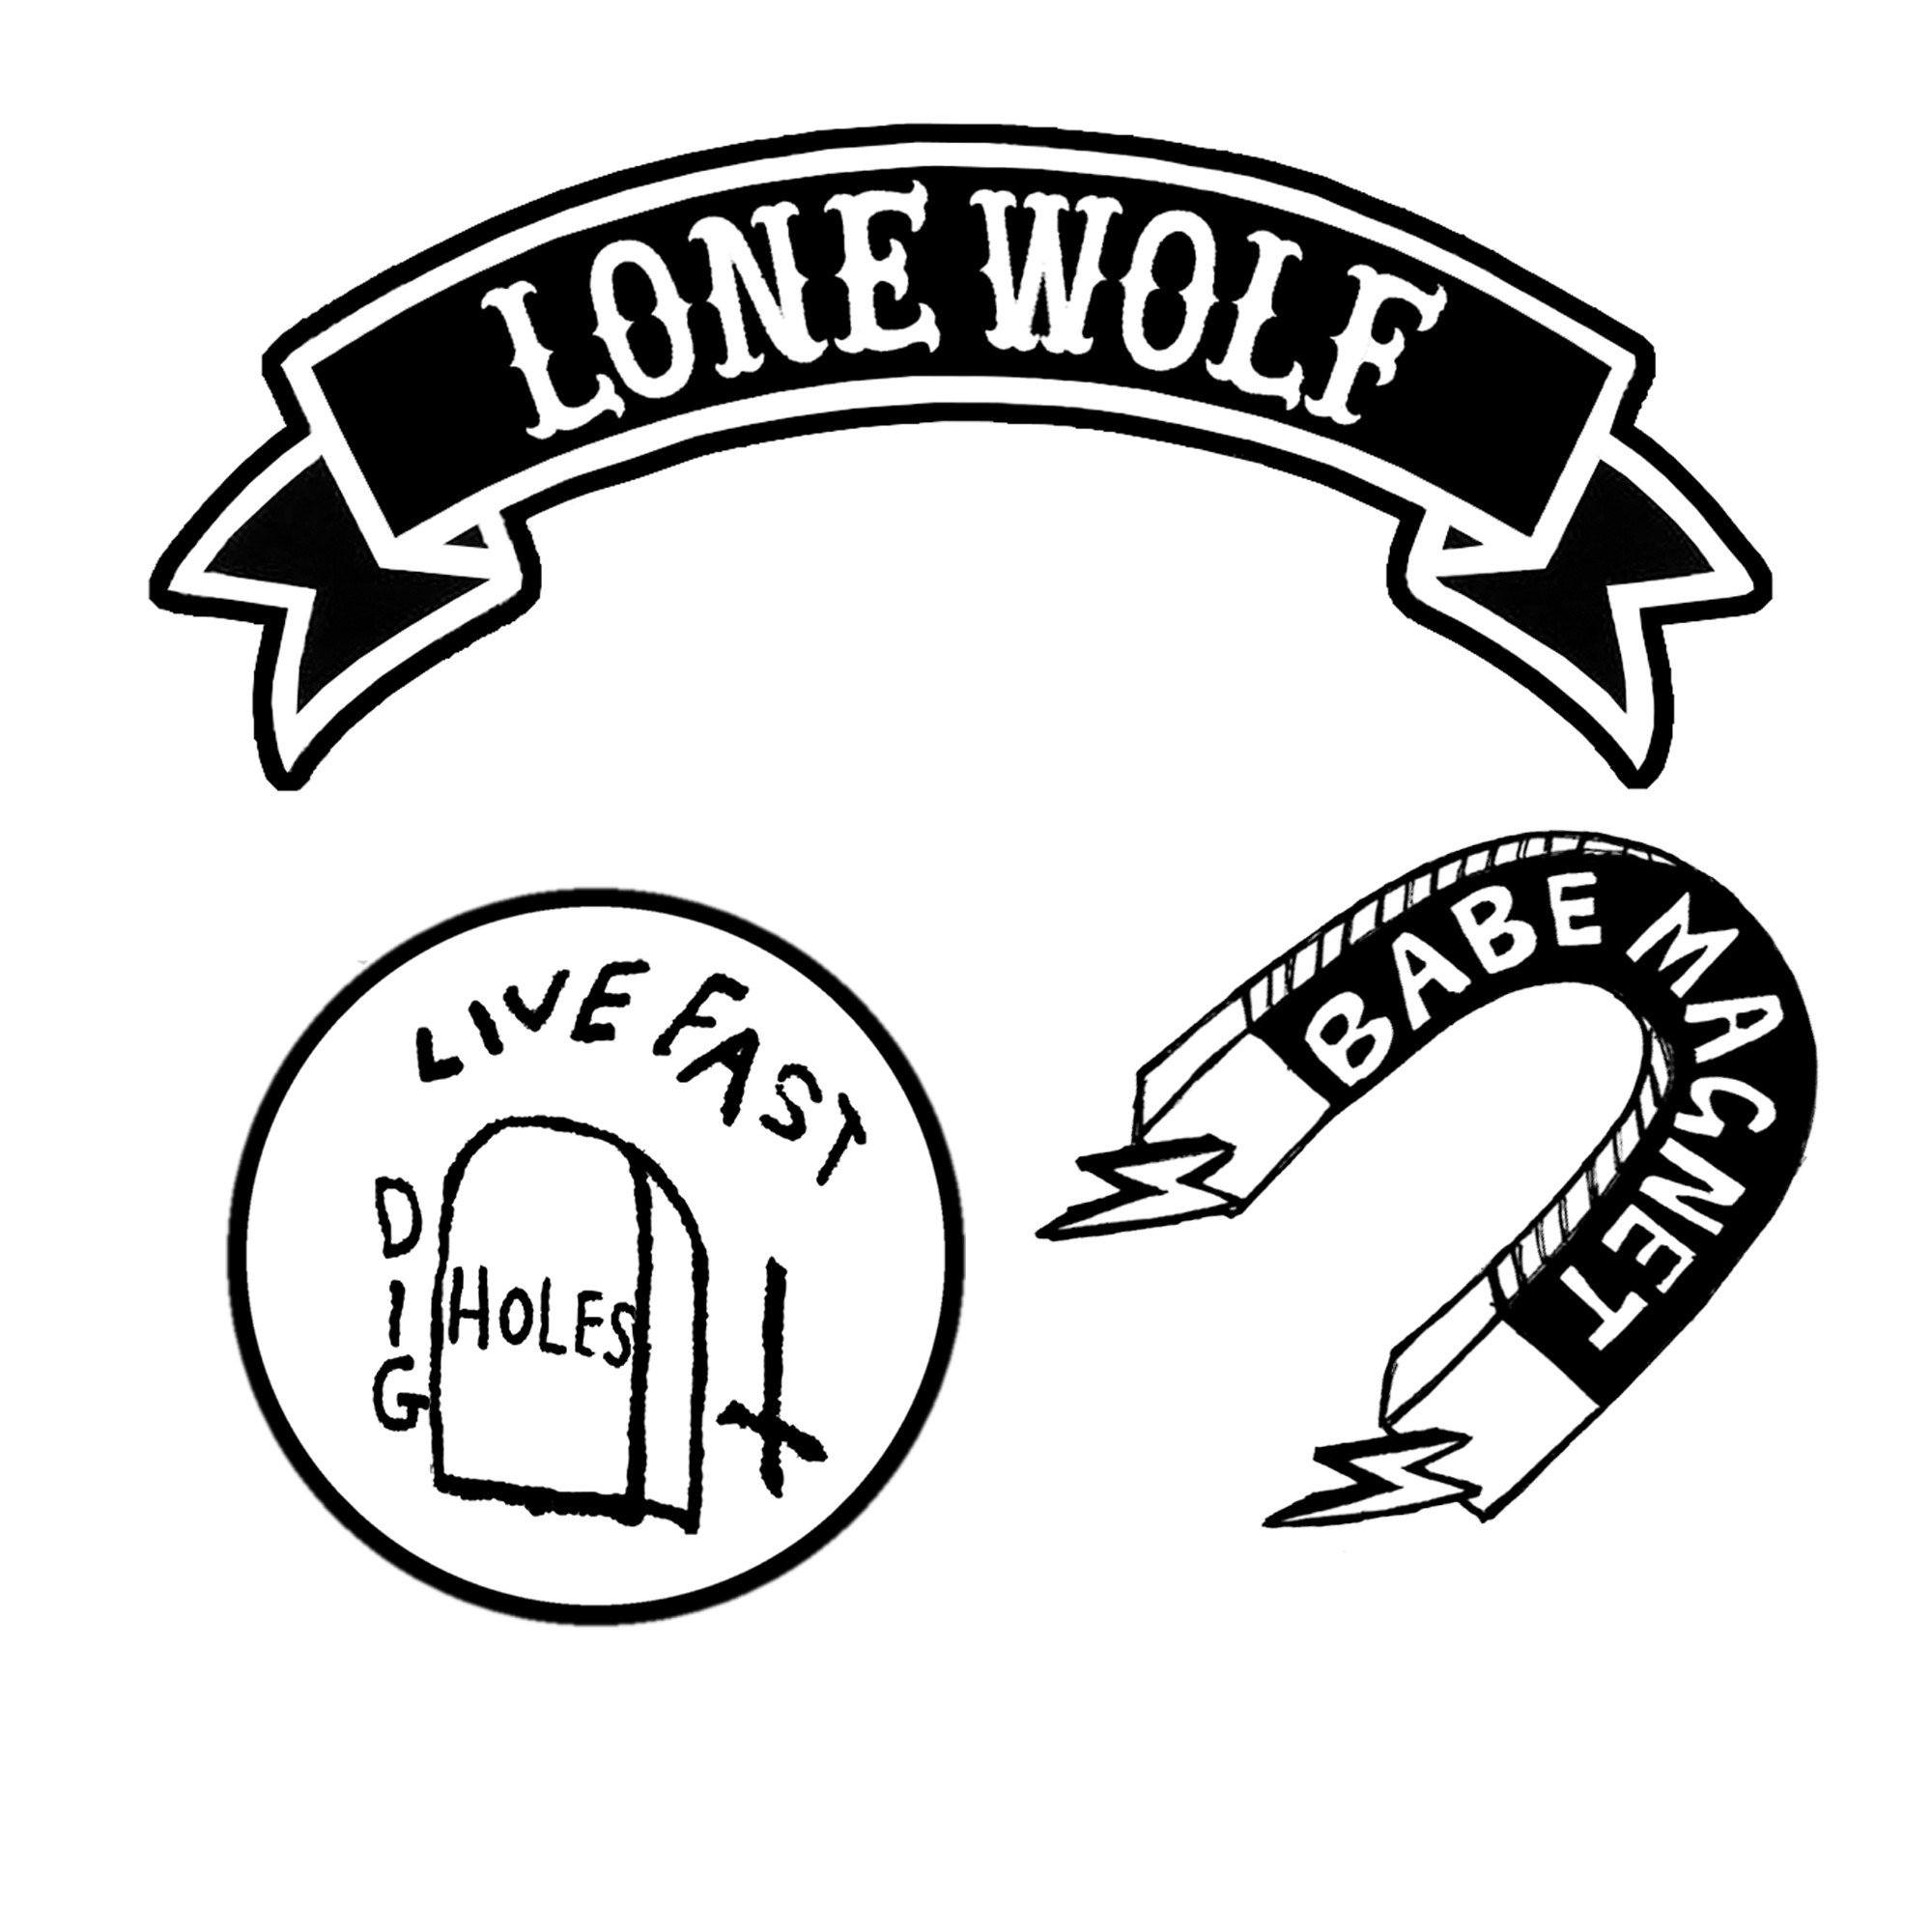 Lonewolf Embroidered patch set by Pethaus